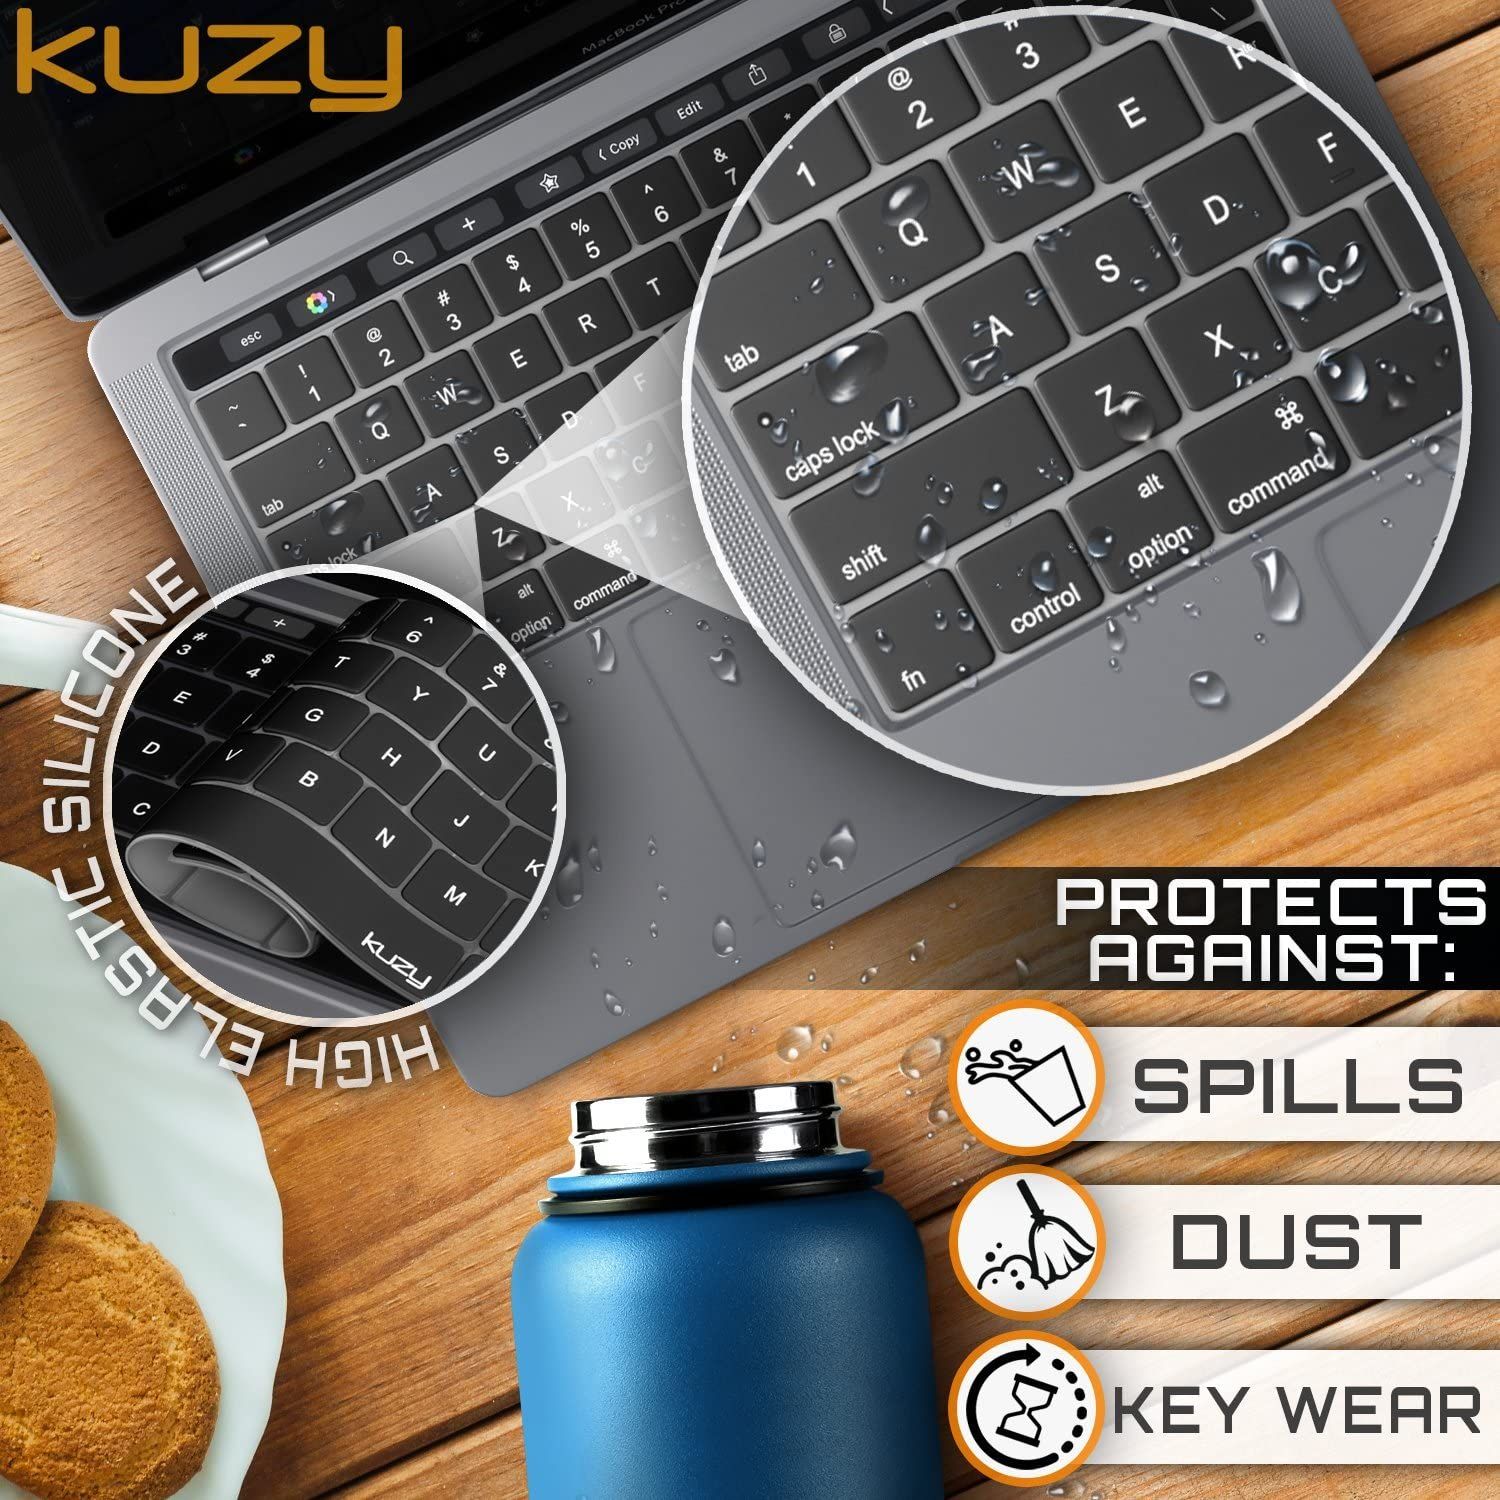 Kuzy Keyboard Cover features